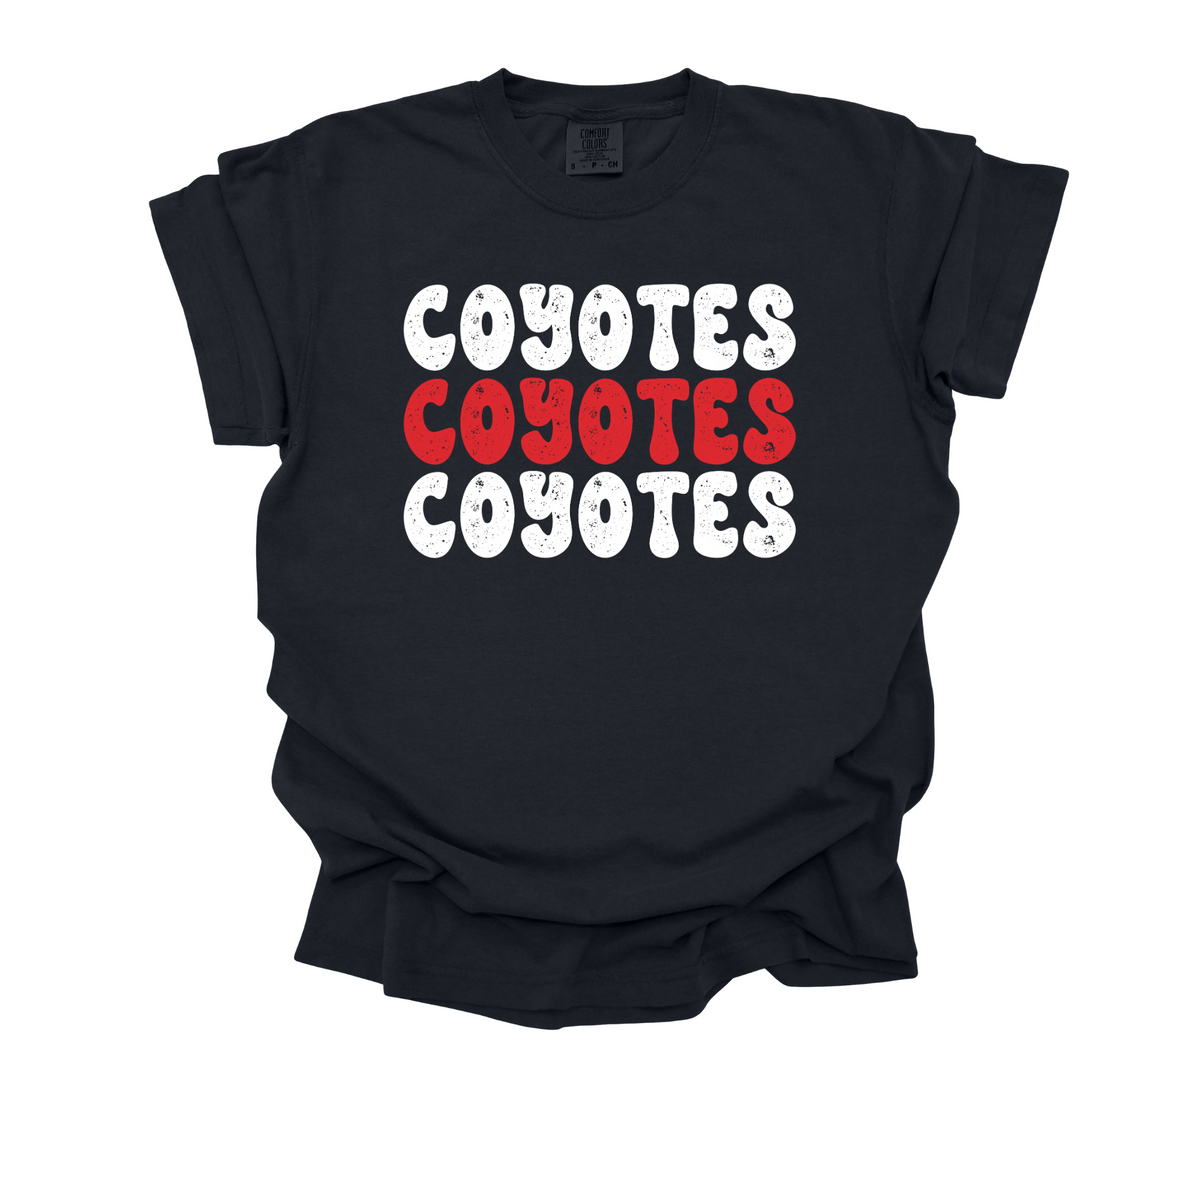 Coyotes on Repeat Tee